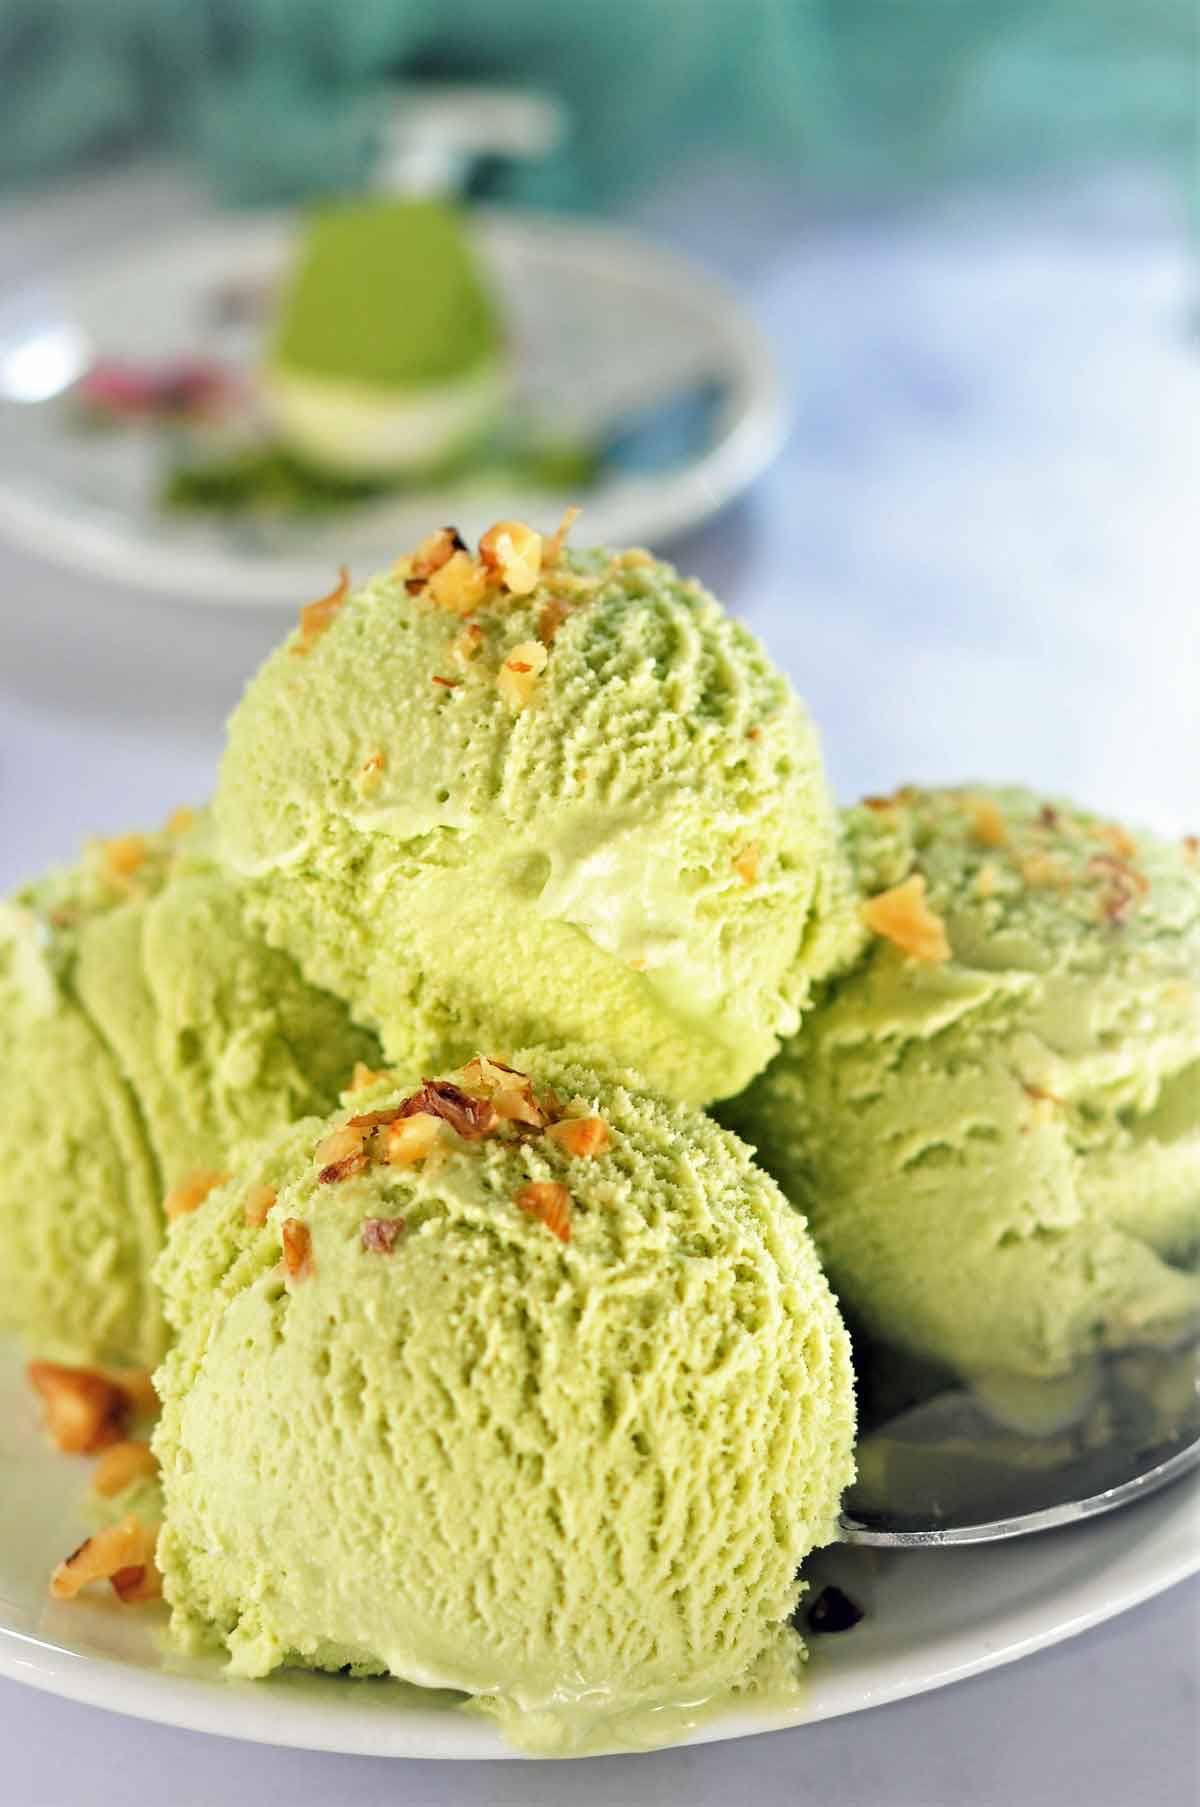 Matcha ice cream scoops served in a plate.